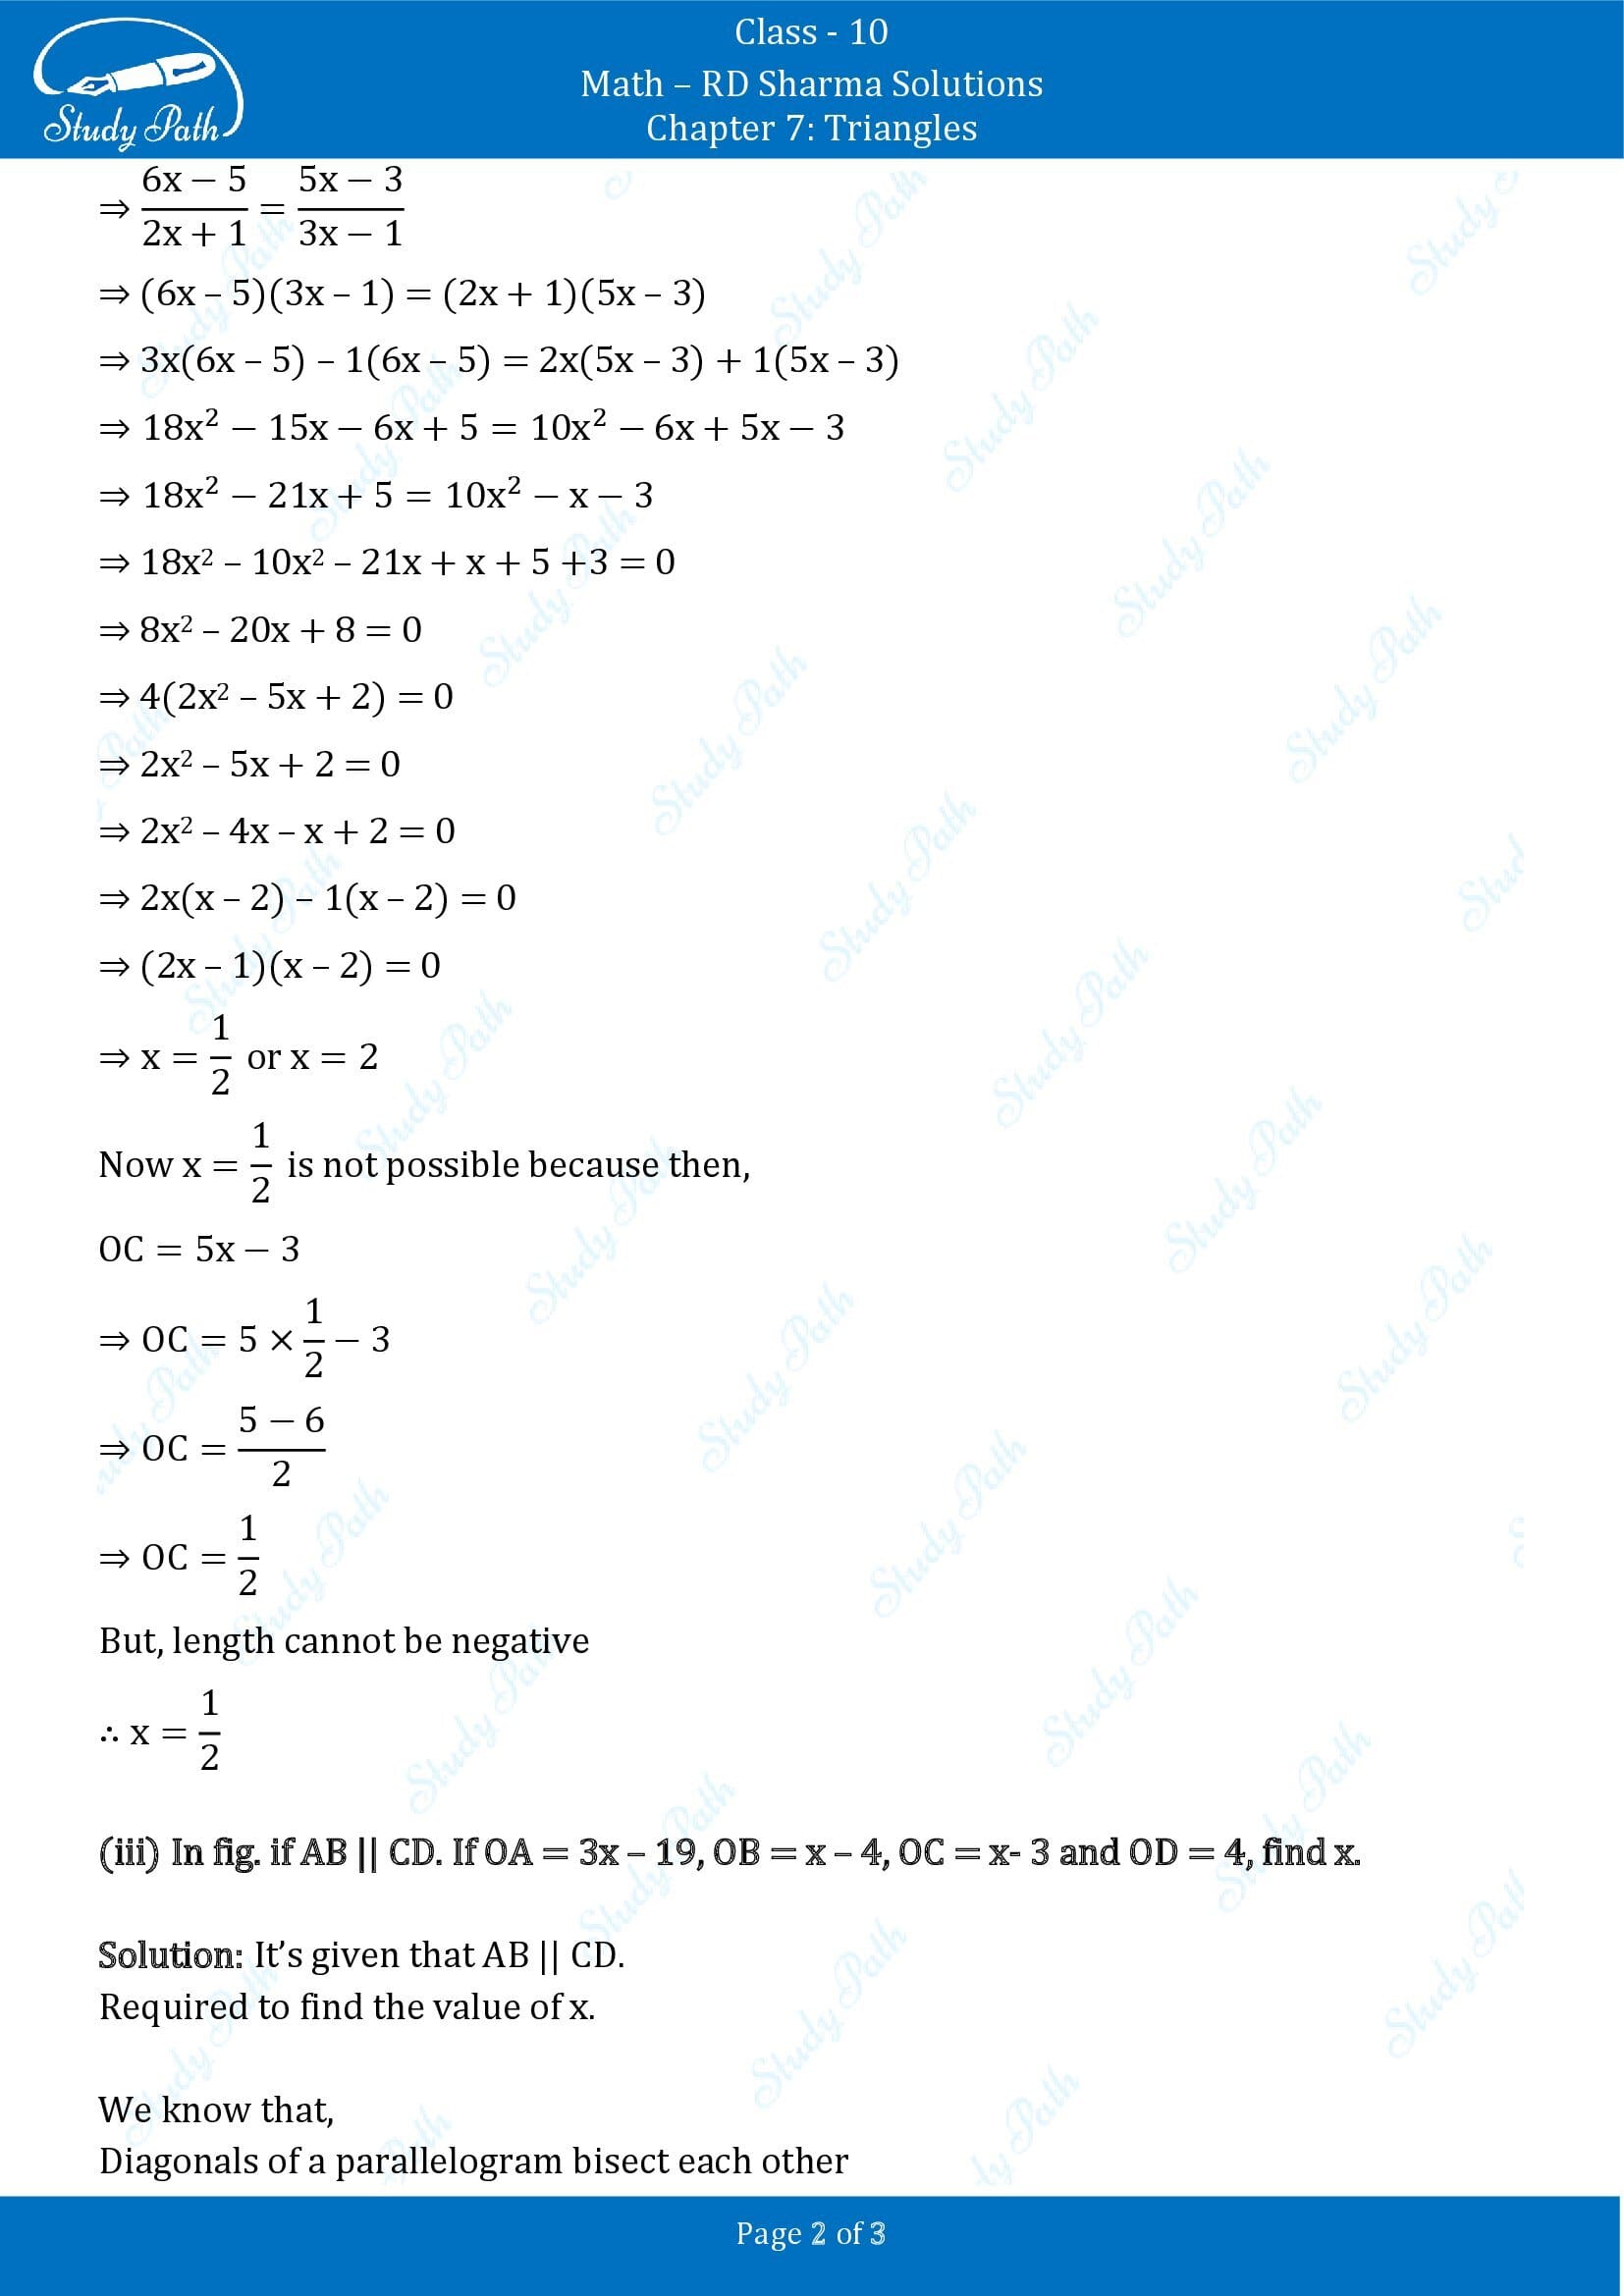 RD Sharma Solutions Class 10 Chapter 7 Triangles Exercise 7.4 00002